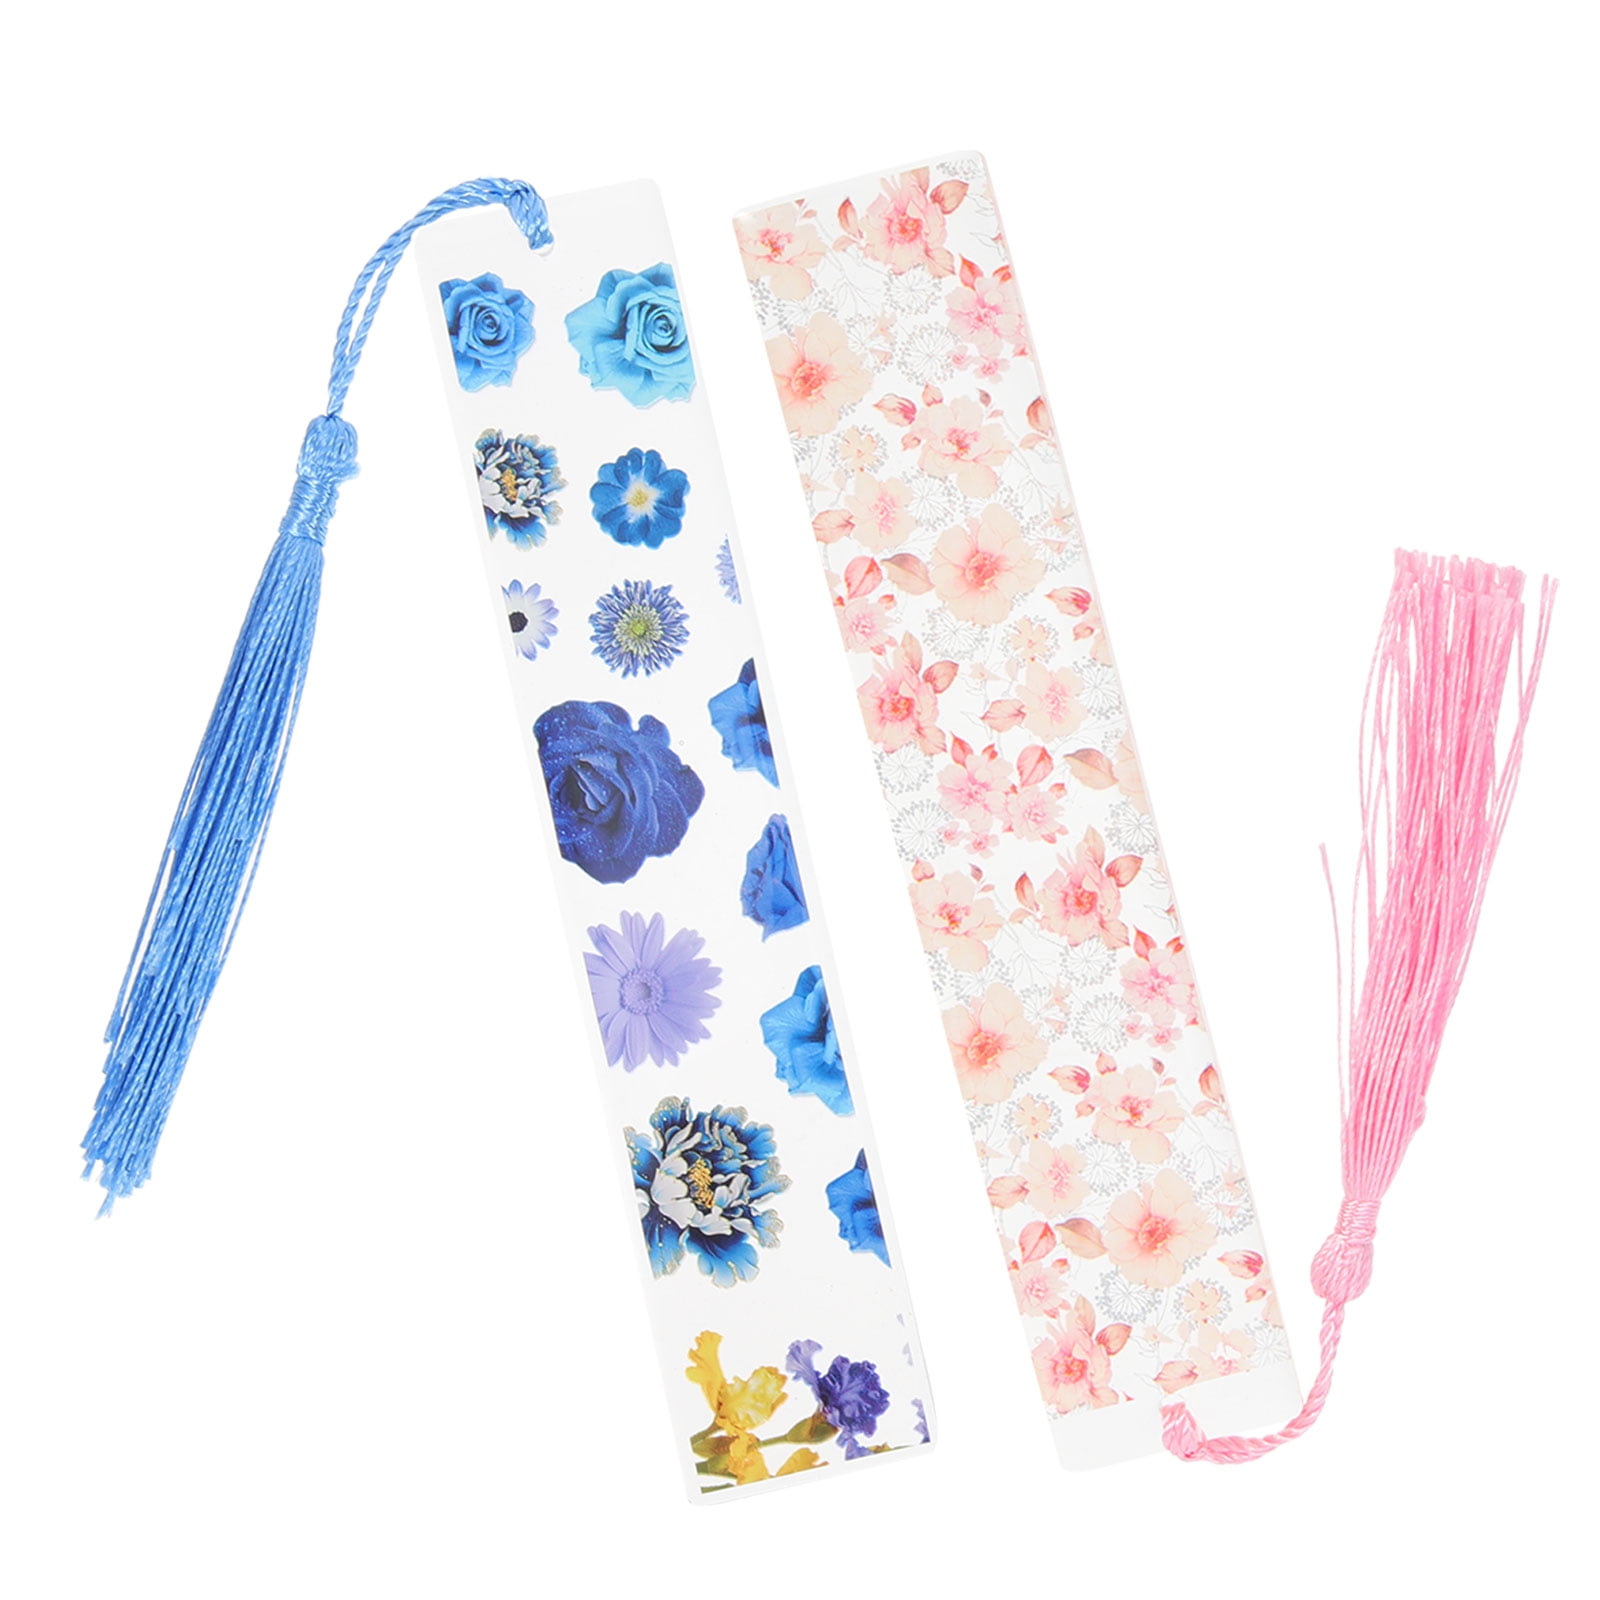  Pink Daisy Dry Flower Bookmark,Handmade Resin Dried Flower  Bookmark with Tassels : Office Products